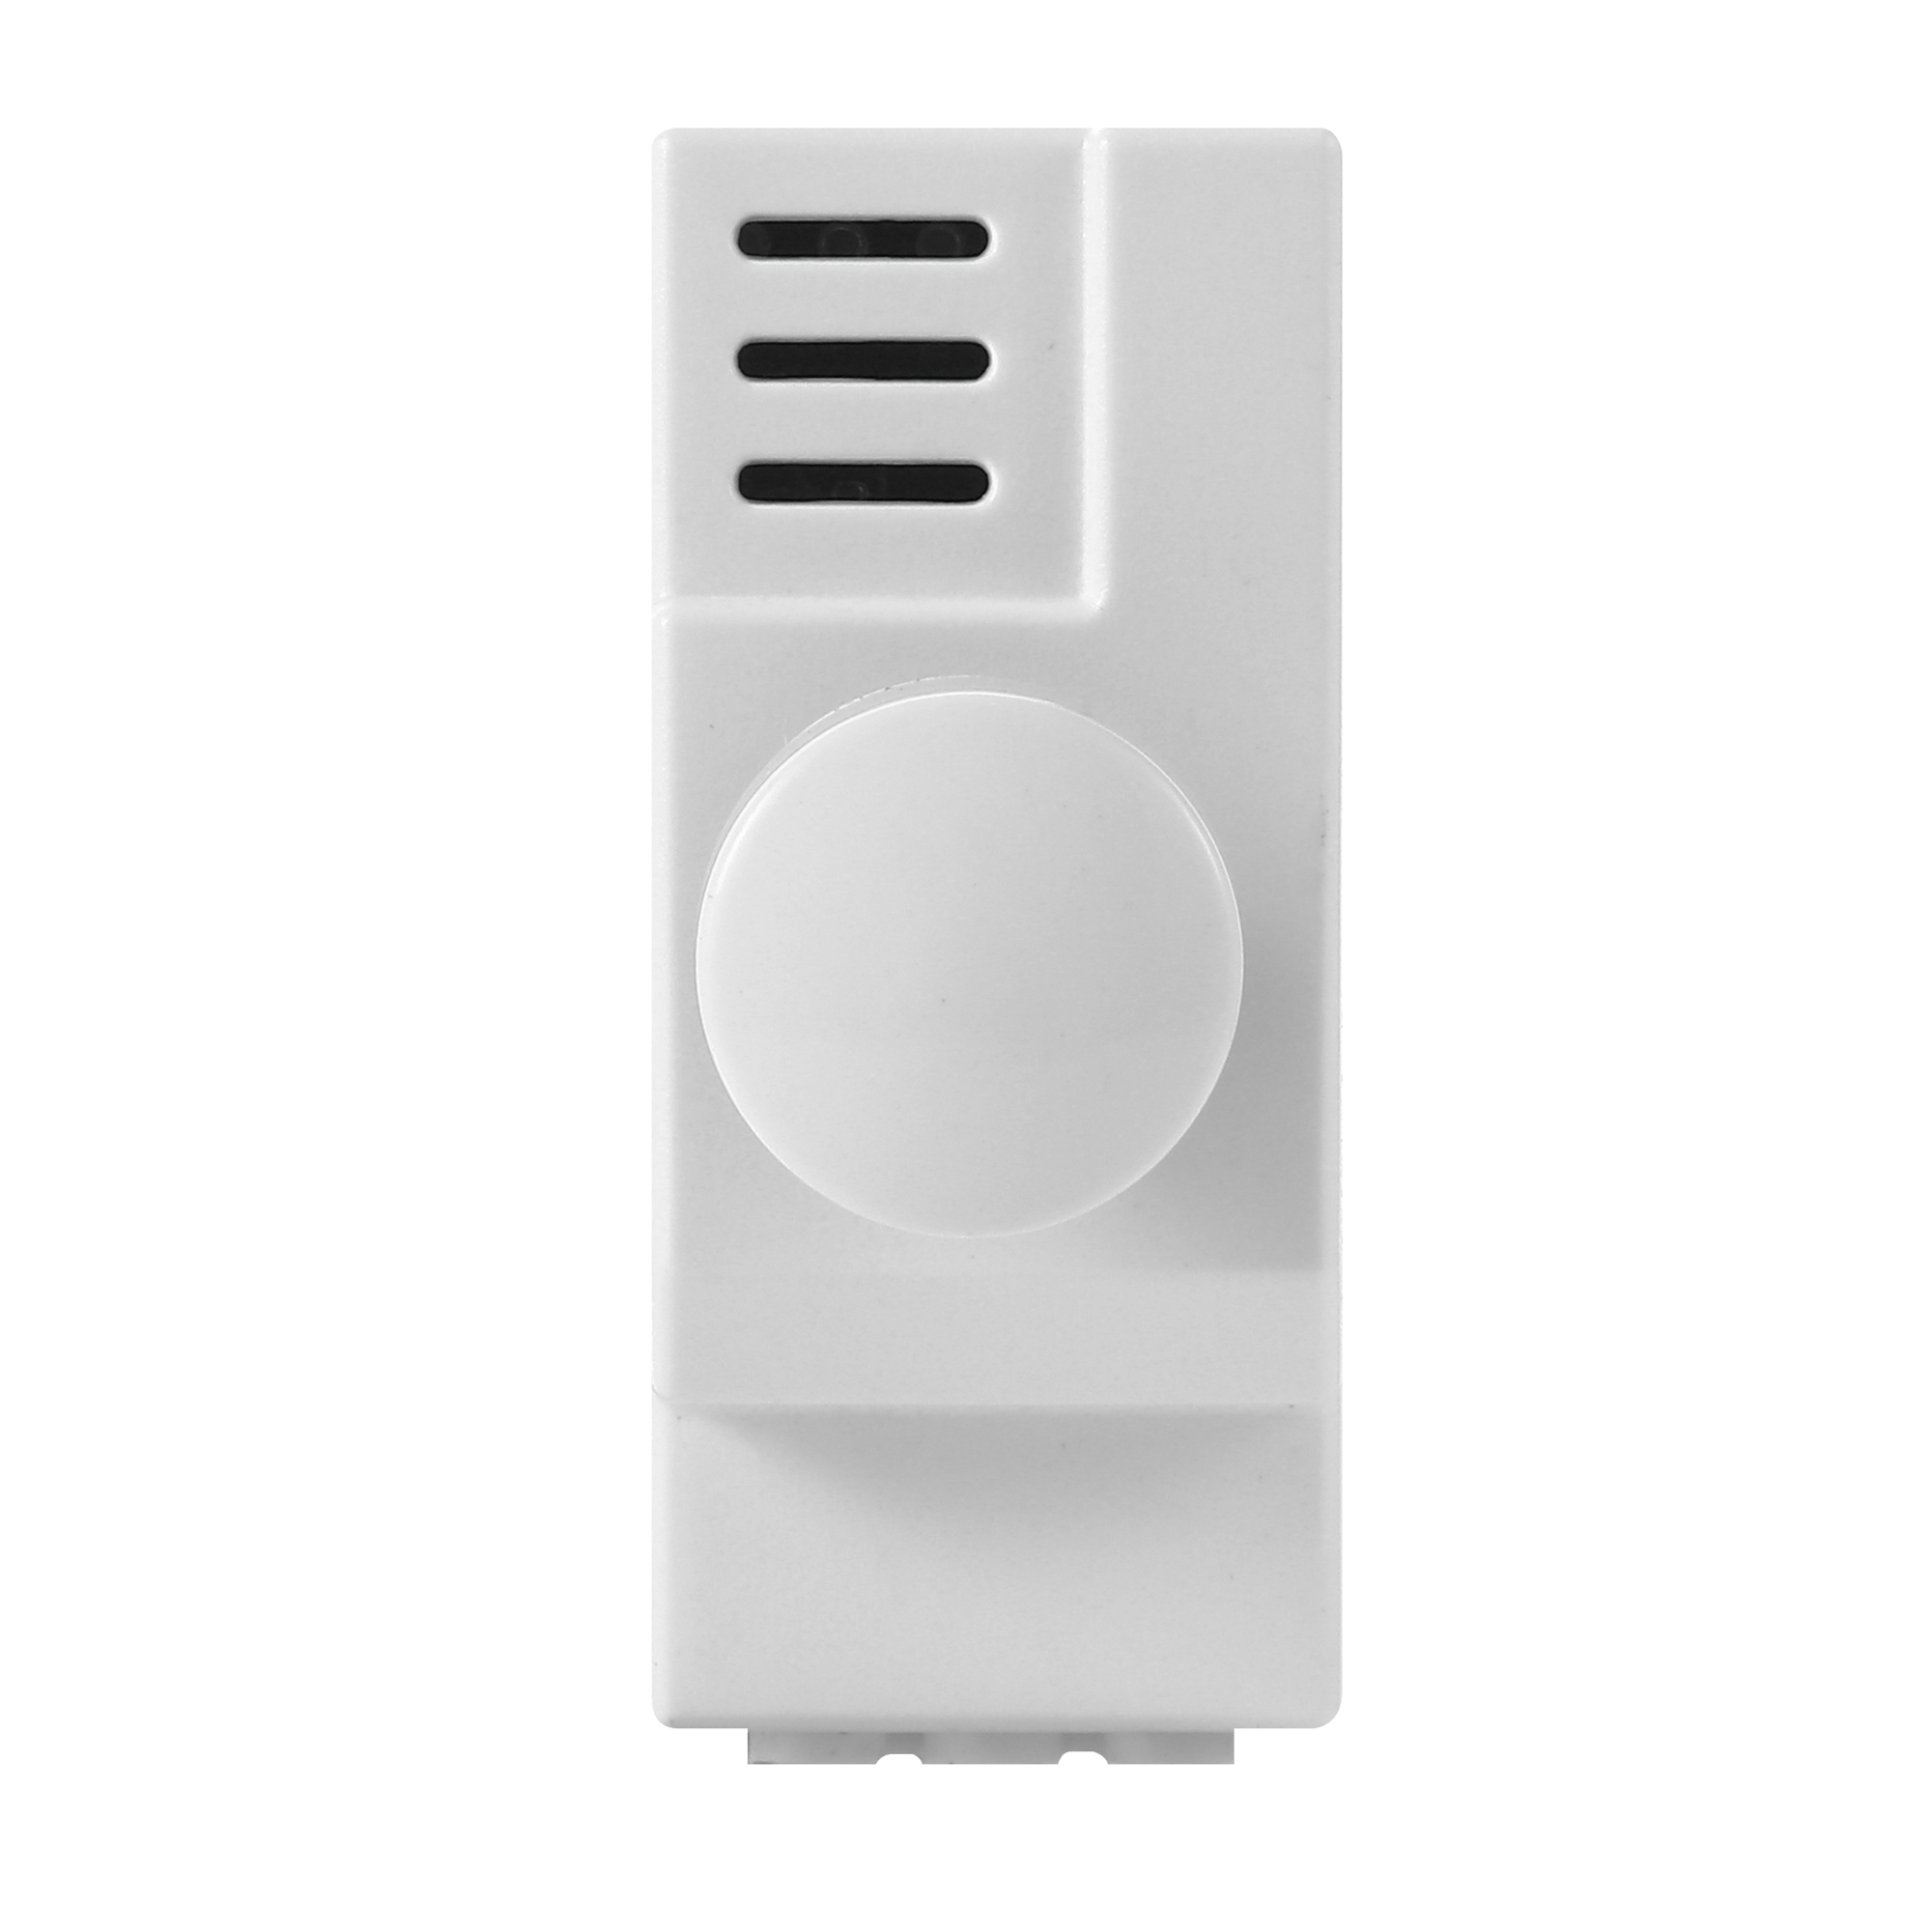 Rotary Wall Dimmer suitable for 200-240V up to 200W